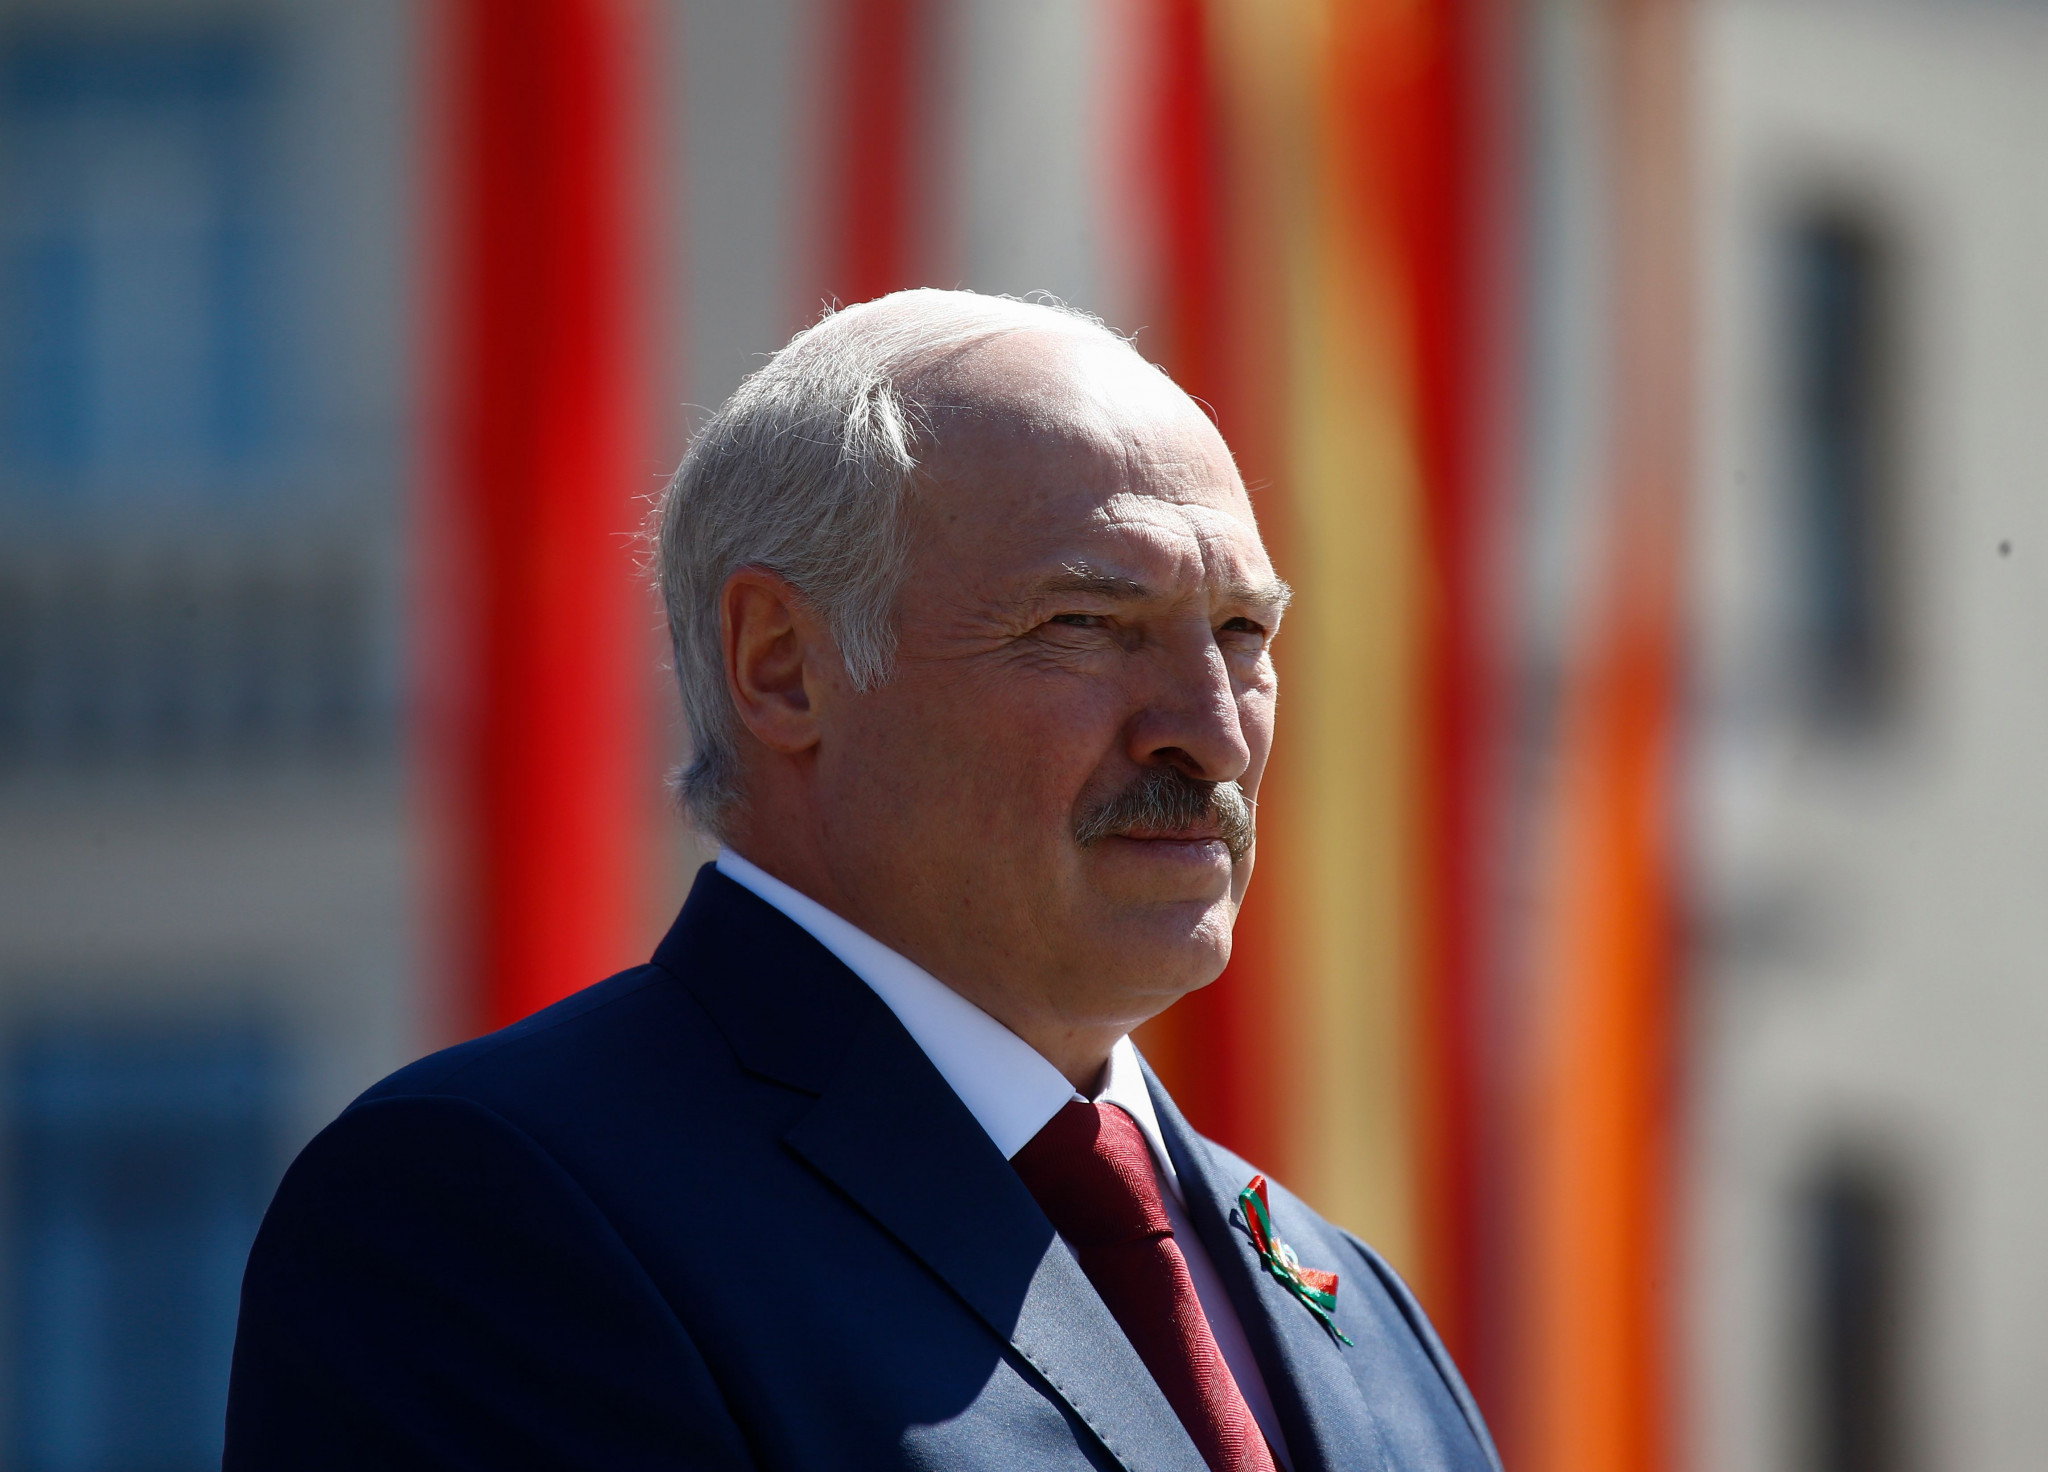 Concerns have been raised by organisations over human rights in Belarus, which is led by Alexander Lukashenko ©Getty Images